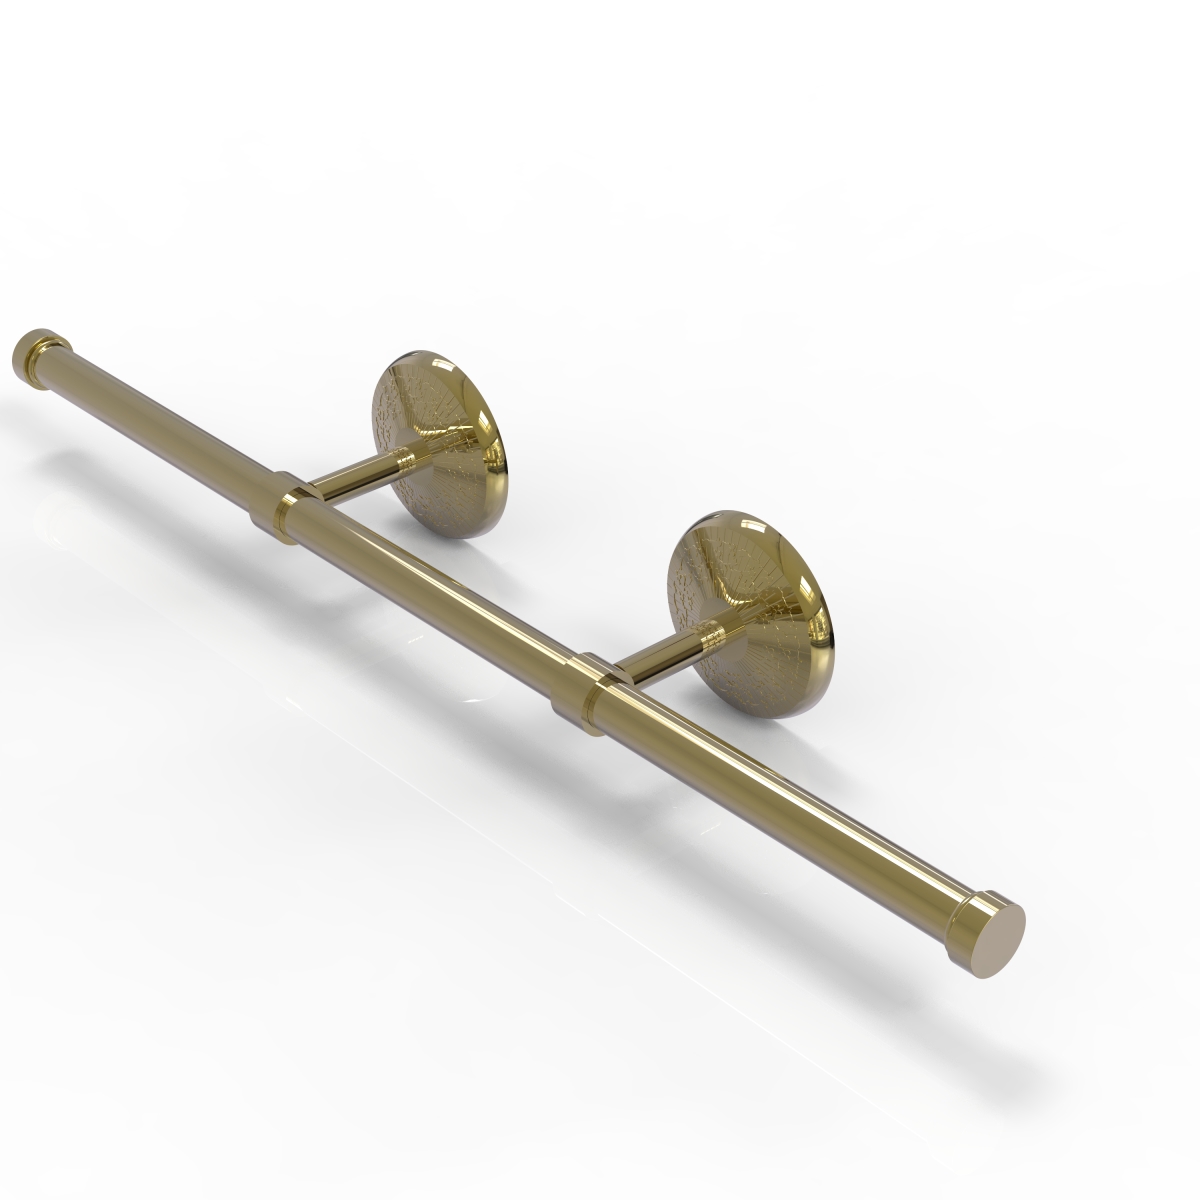 Mc-gt-3-unl Monte Carlo Collection Wall Mounted Horizontal Guest Towel Holder, Unlacquered Brass